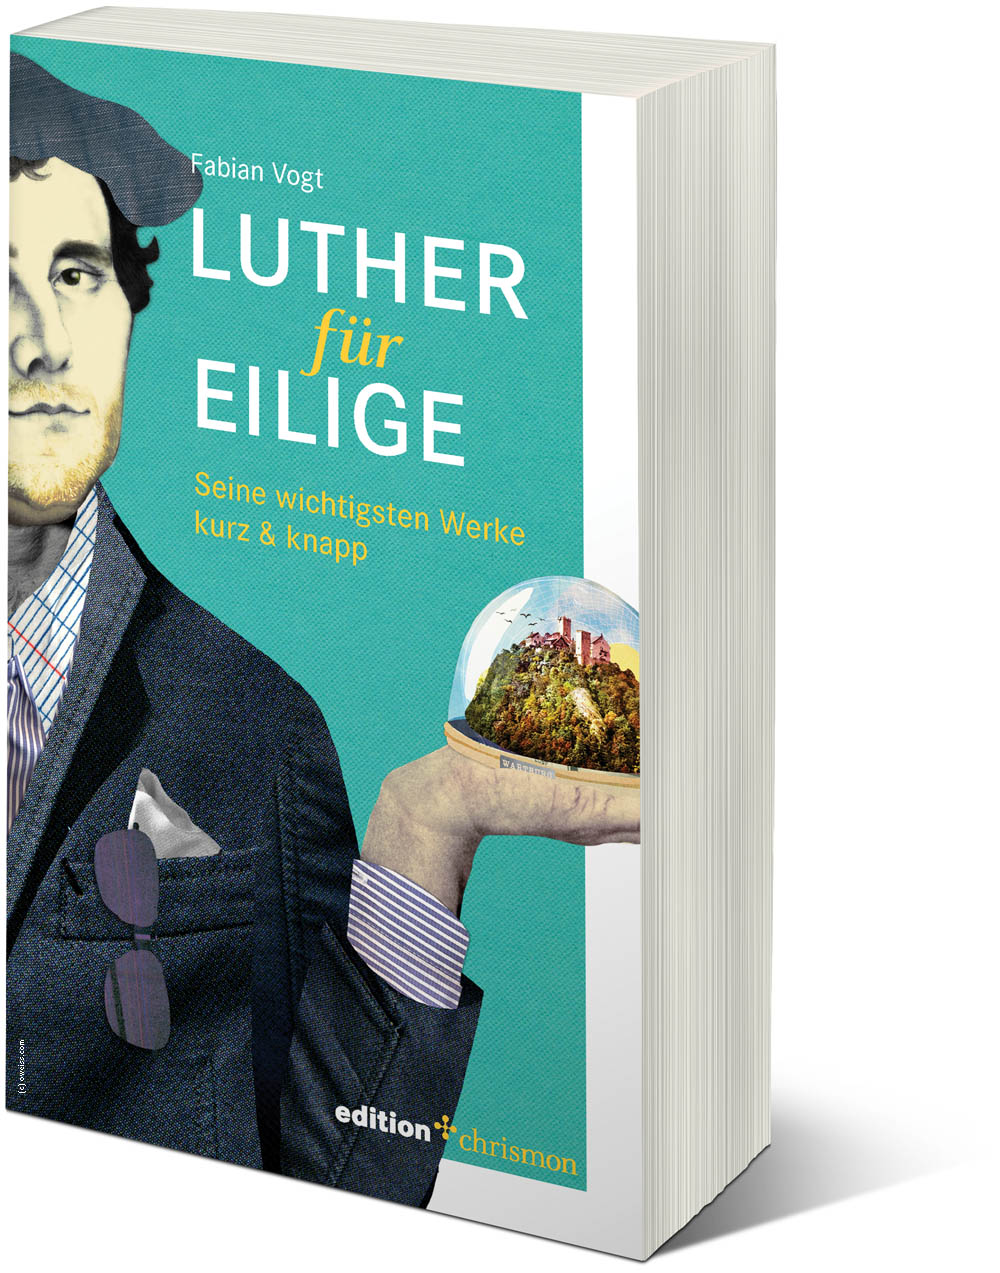 Fabian Vogt Luther für Eilige Martin Luther Reformation Protestantism Christianity religion theology faith reform church Bible theology priest rules book illustrations Titeldesign Buchcover covers designs Titelbildgestaltung Buchtitel Coverentwicklung Coverdesigns Titel Buchverlag Bücher